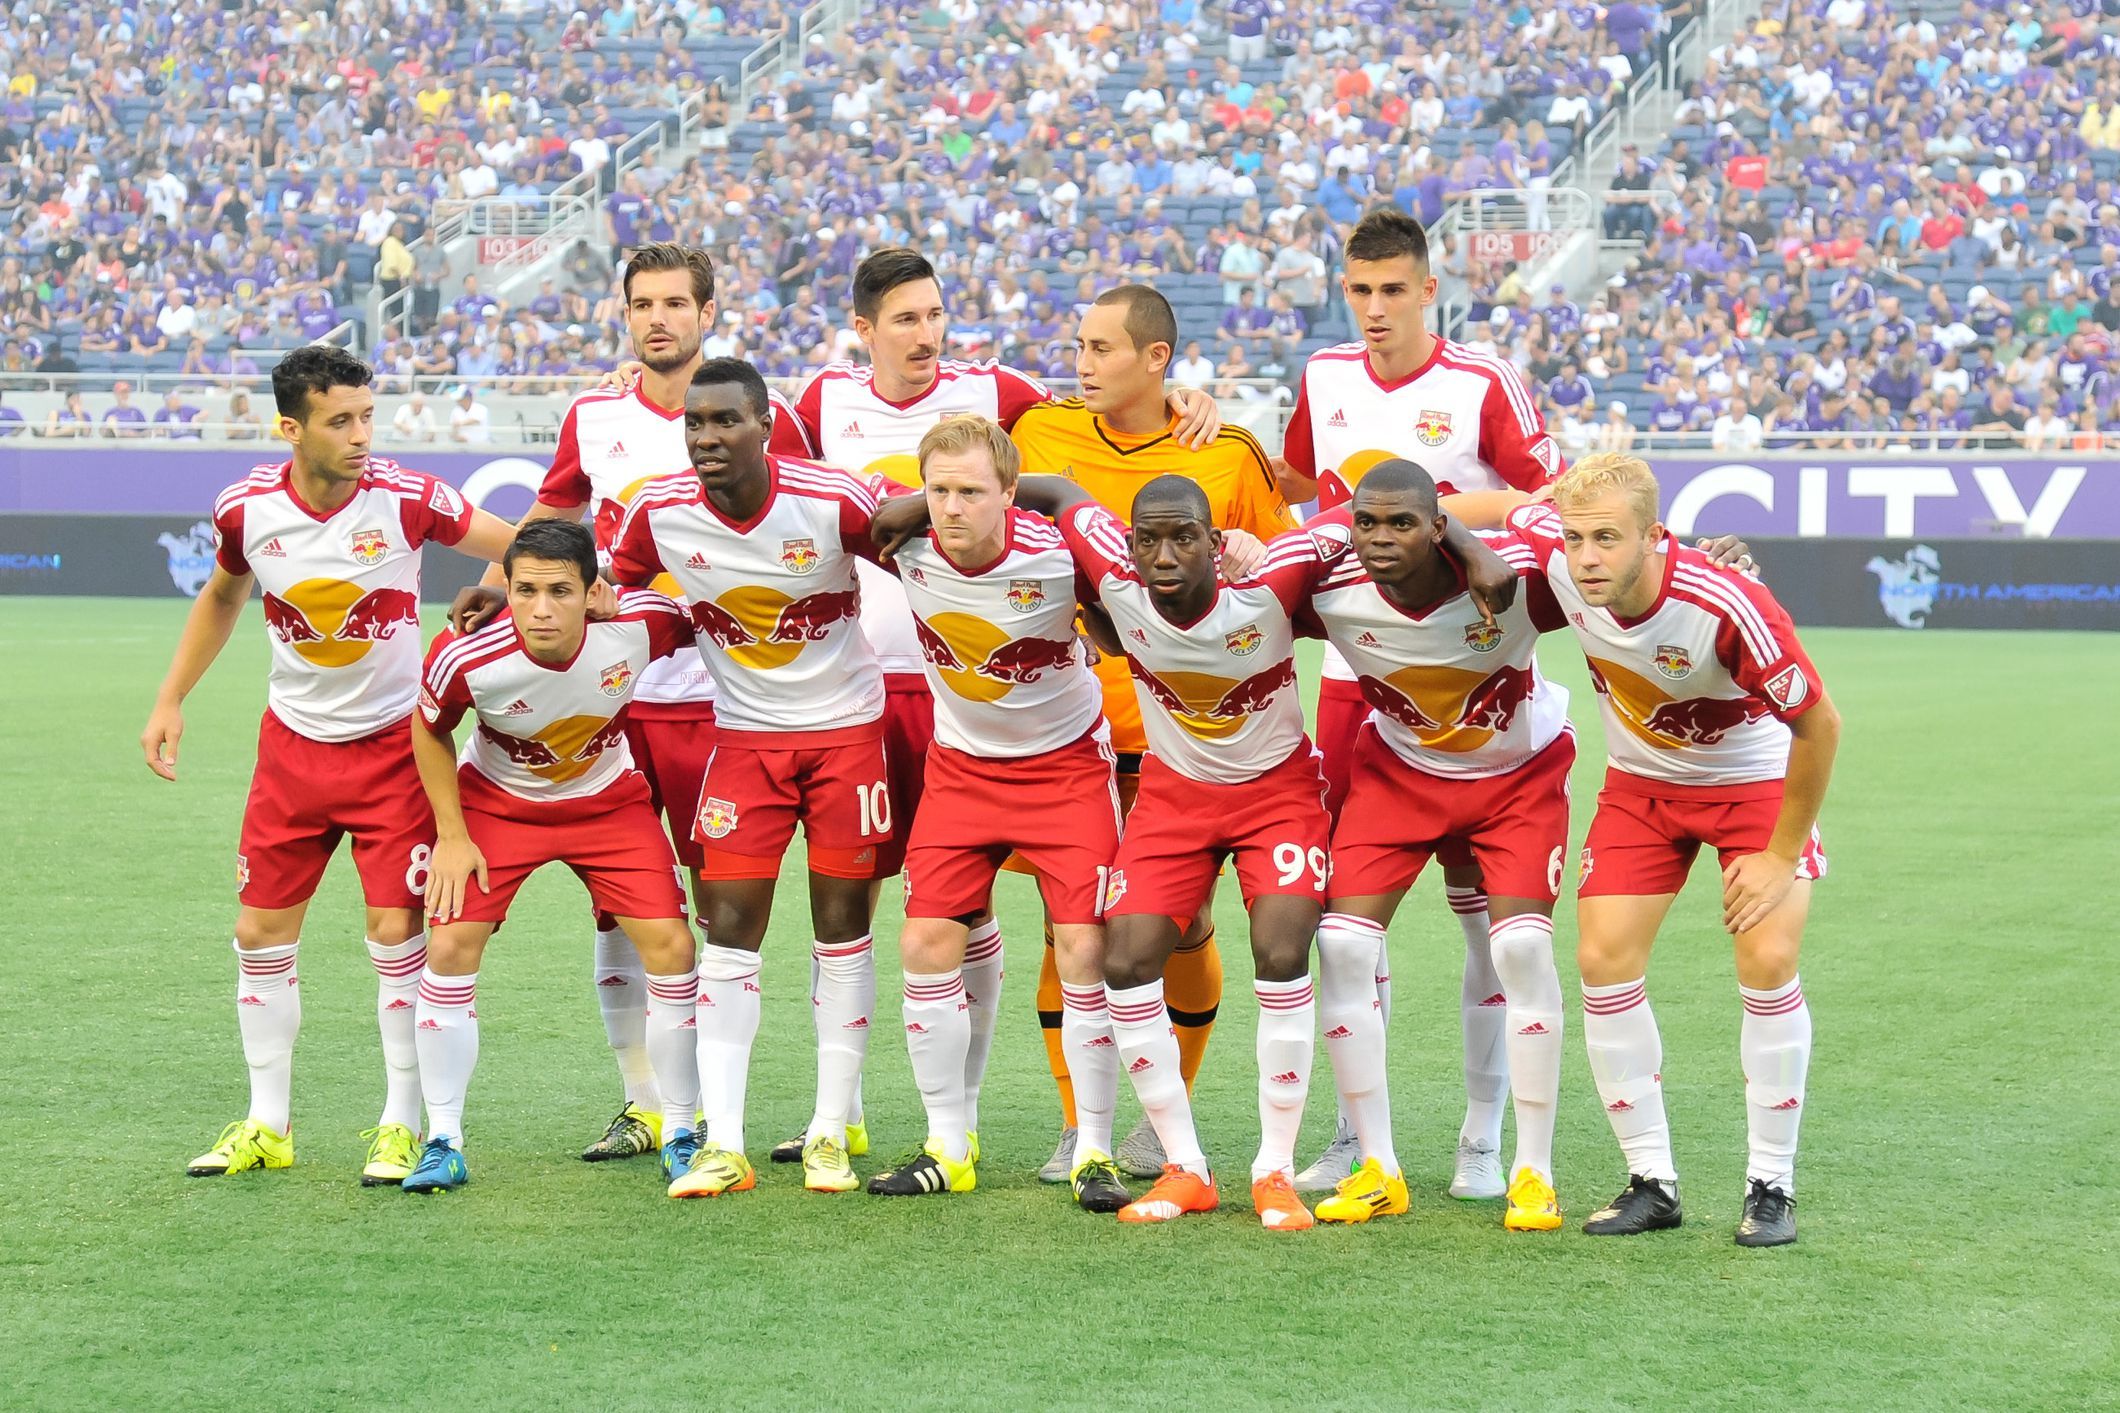 New York Red Bulls vs Columbus Crew Prediction, Betting Tips and Odds | 19 MARCH 2023